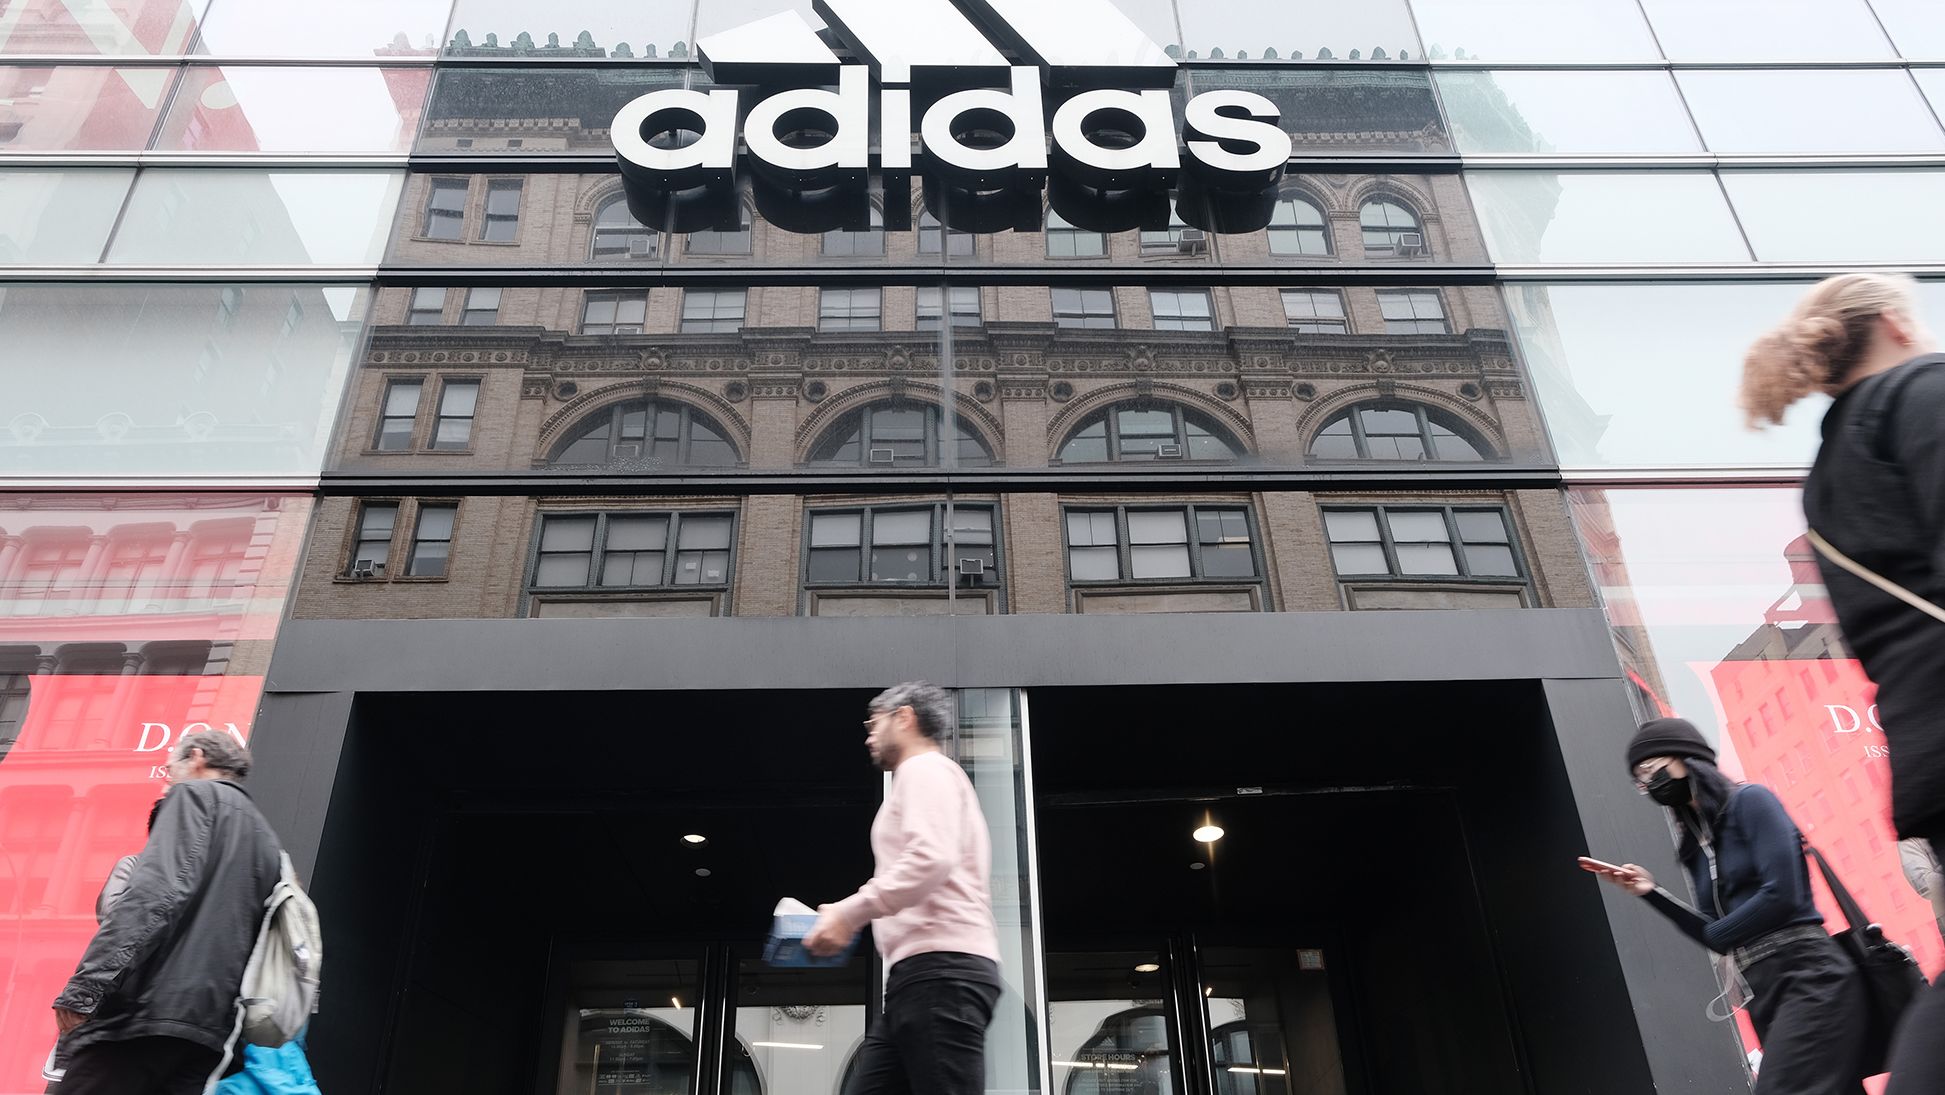 Kanye West: What took Adidas, Gap and others so long cut ties? | CNN Business